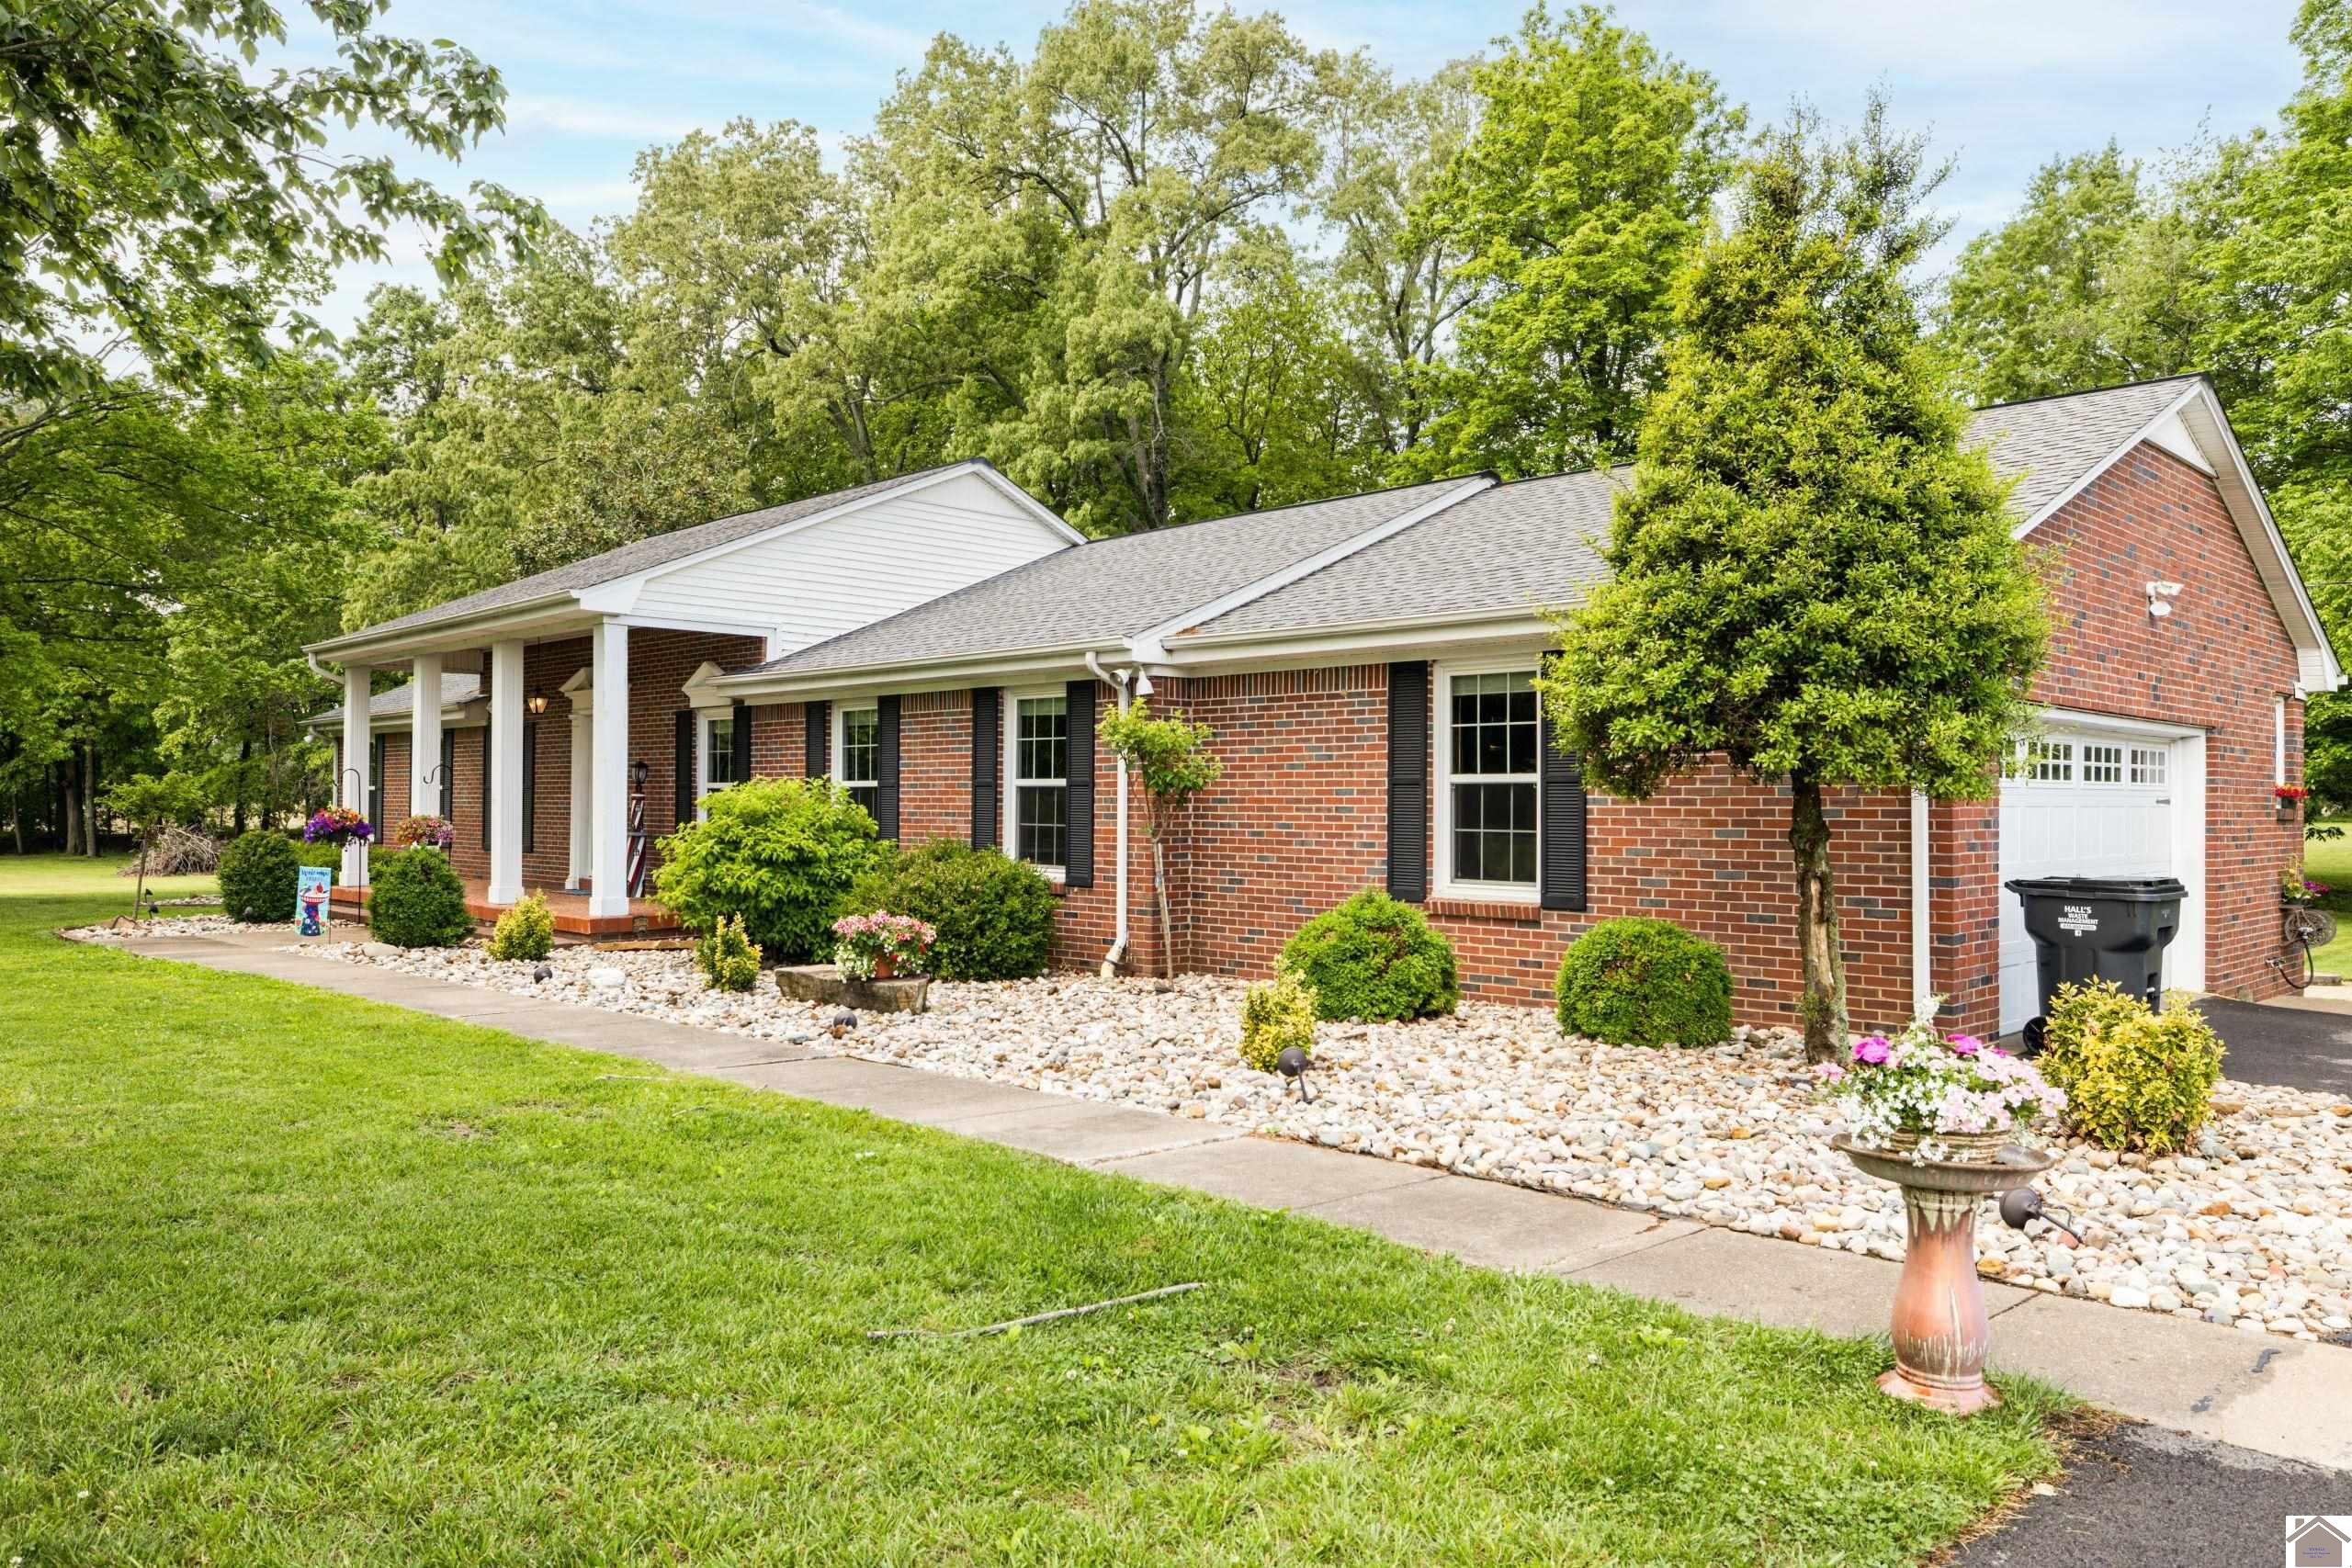 345 Robertson Road South, Murray, KY 42071 Listing Photo  3